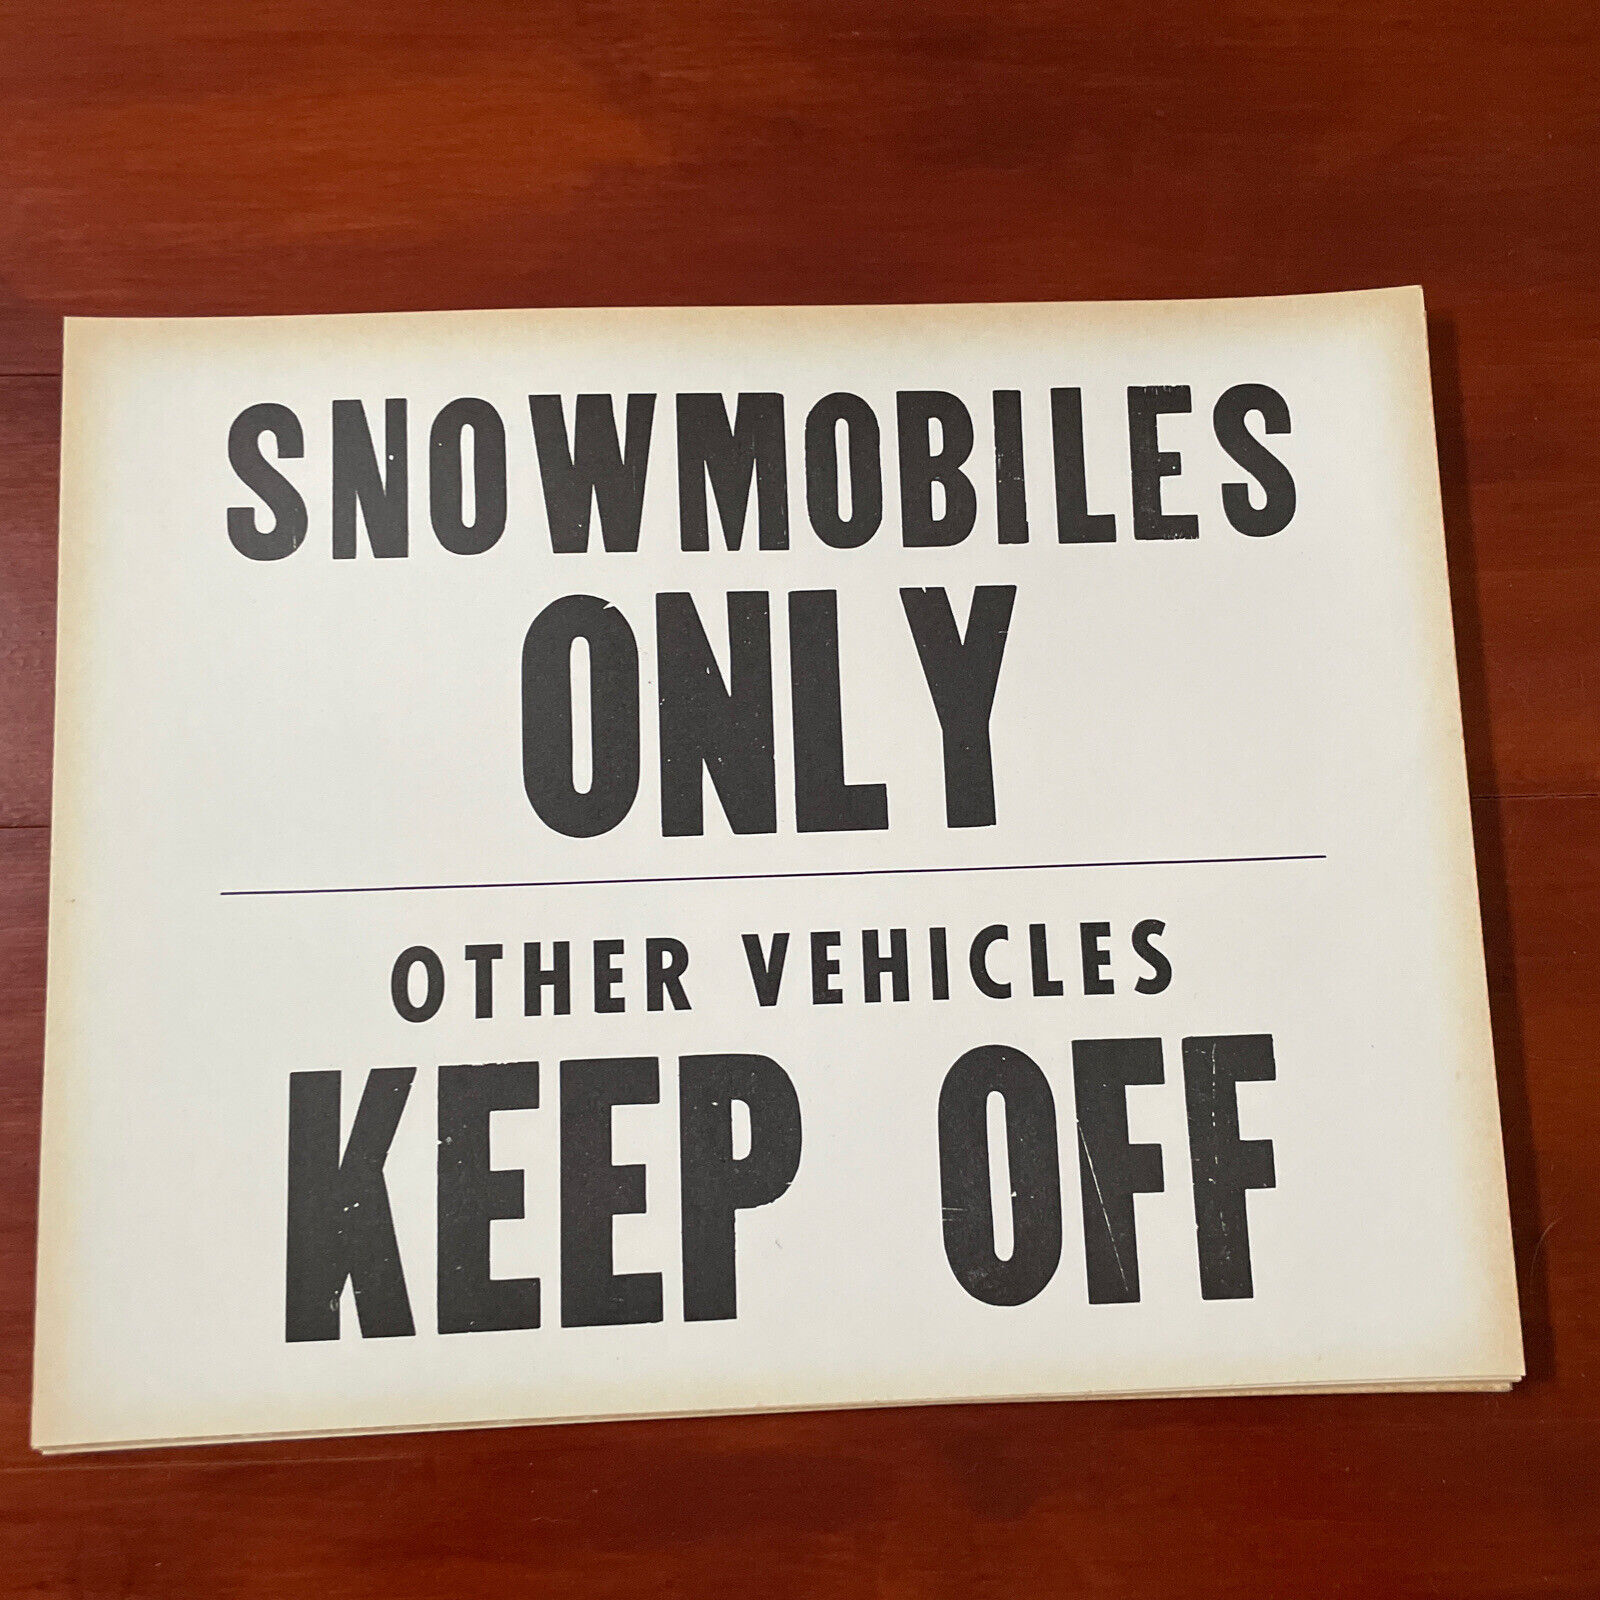 “Snowmobiles Only - Other Vehicles Keep Off” Cardboard Sign